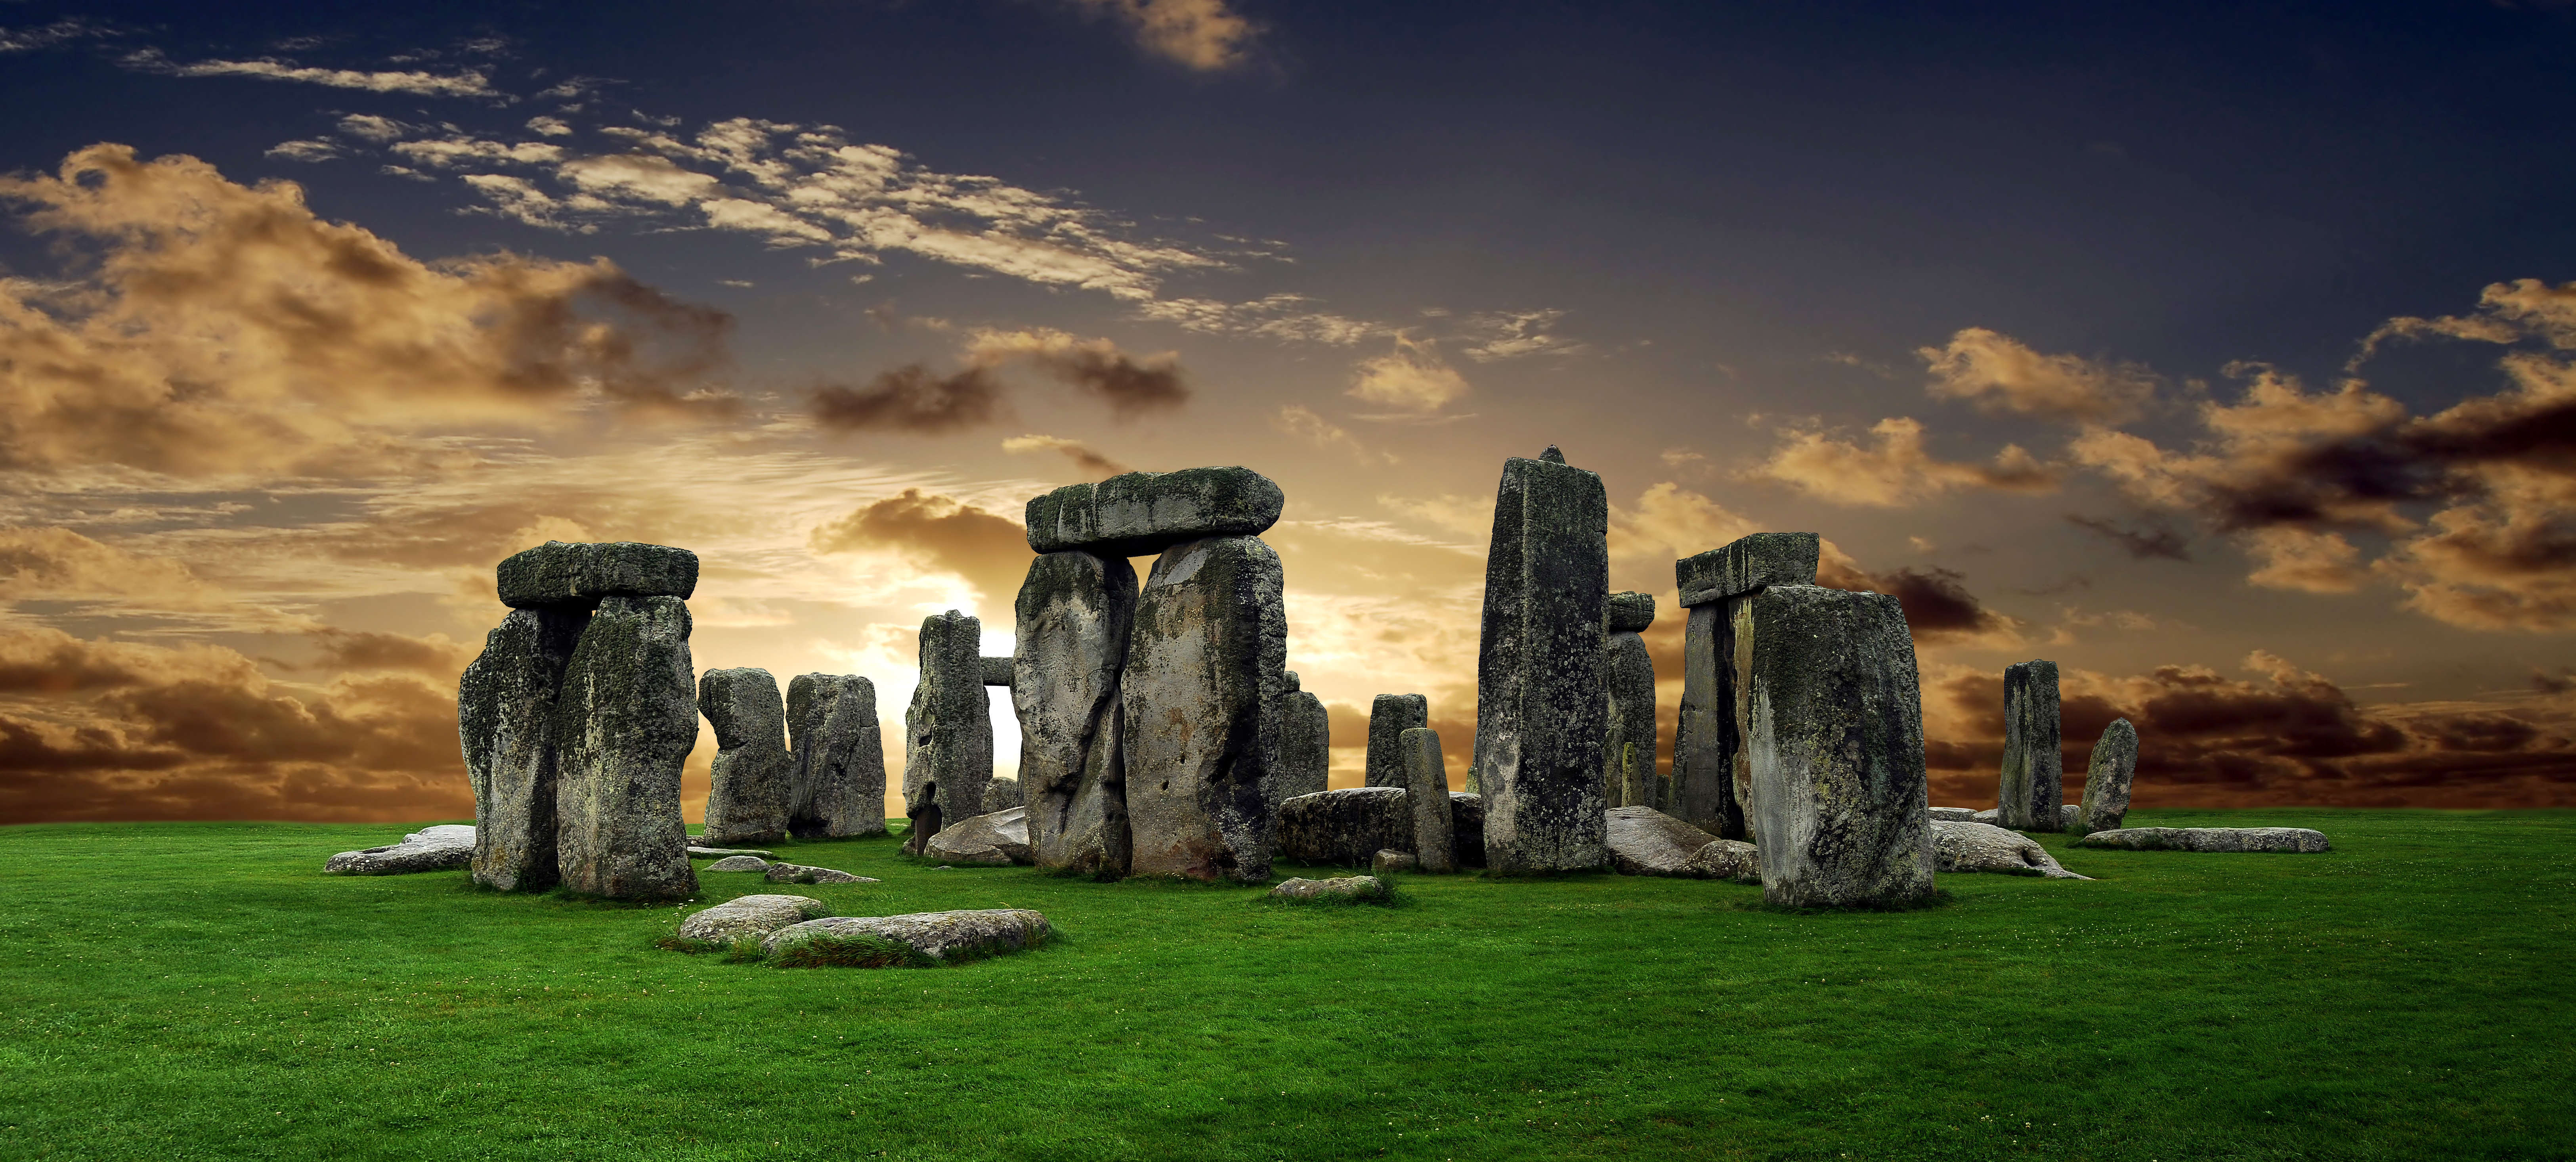 Major New Discovery that Rewrites History of Stonehenge